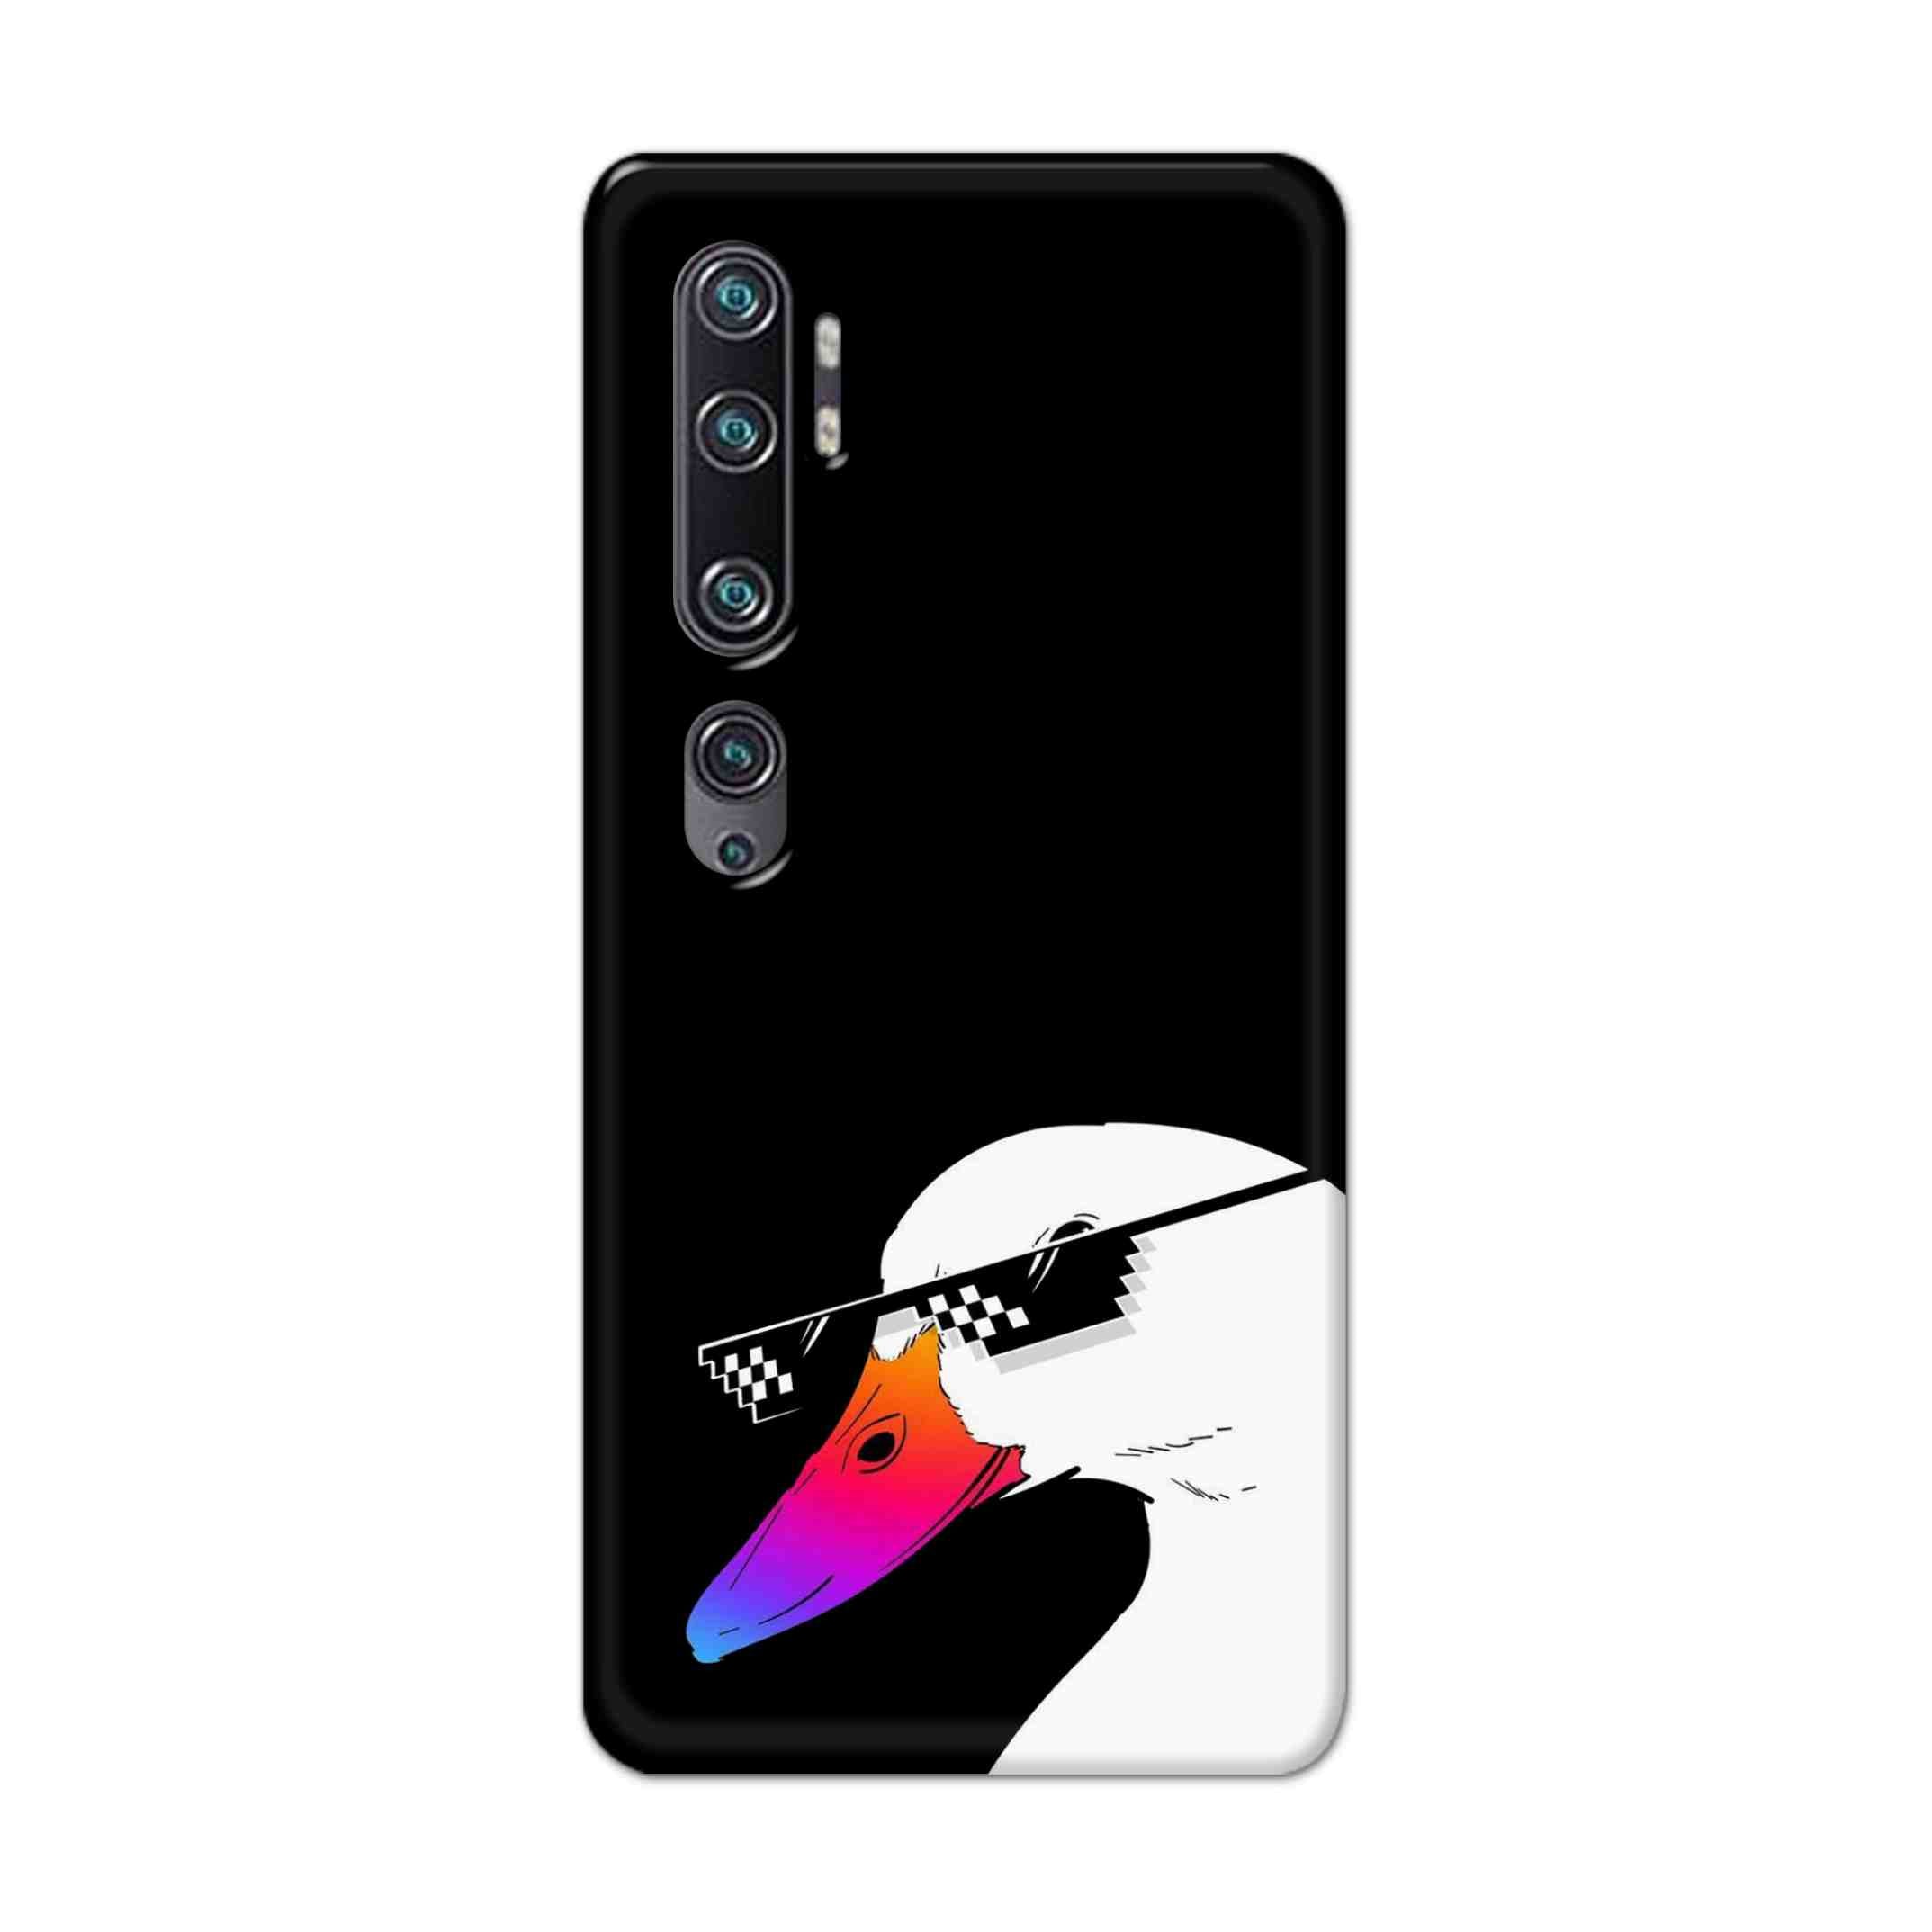 Buy Neon Duck Hard Back Mobile Phone Case Cover For Xiaomi Mi Note 10 Online